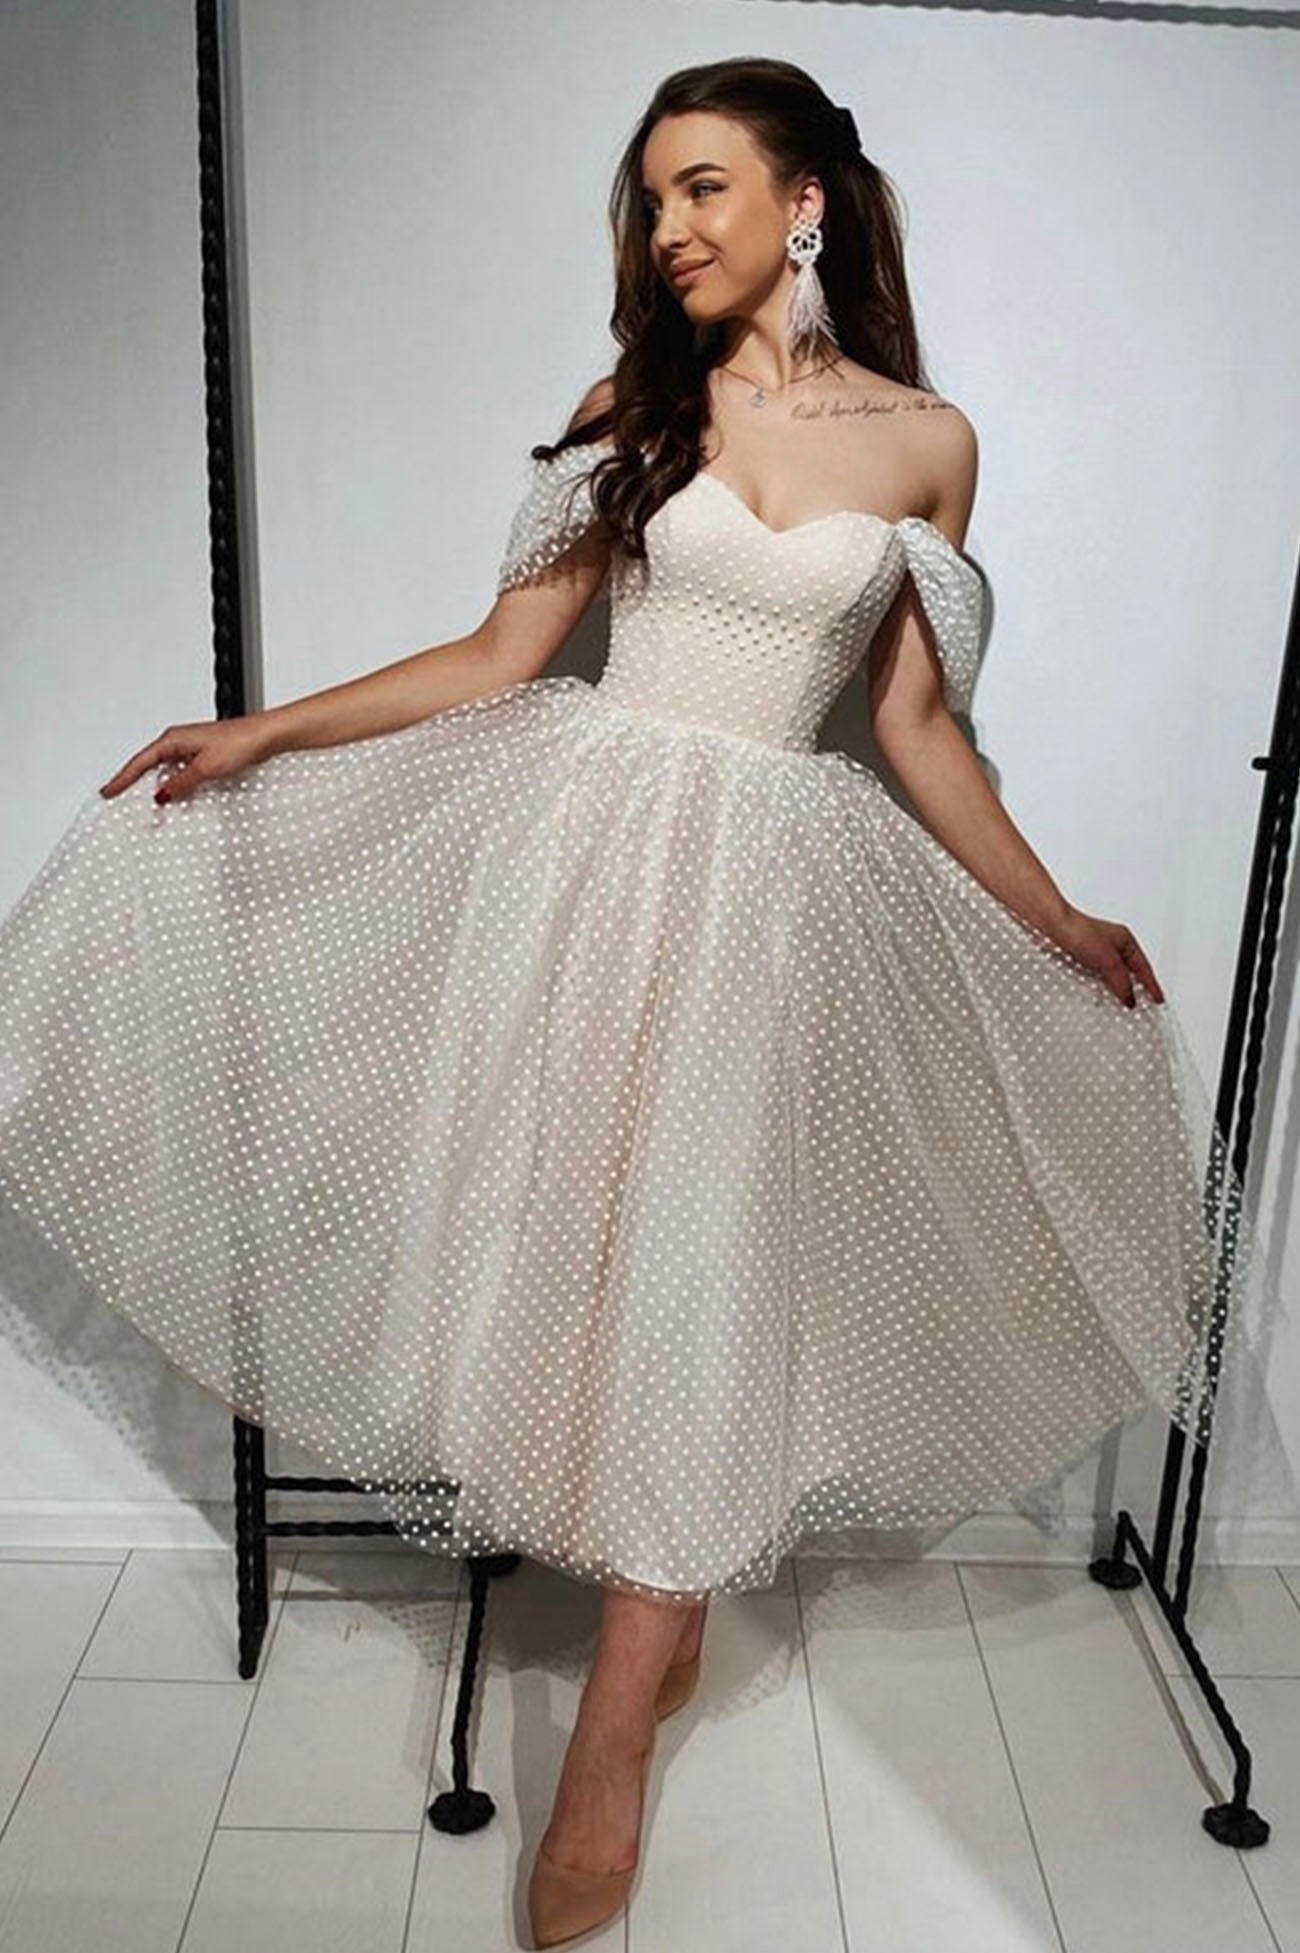 Champagne Tulle Short Prom Dress, Cute A-Line Off the Shoulder Evening Party Dress